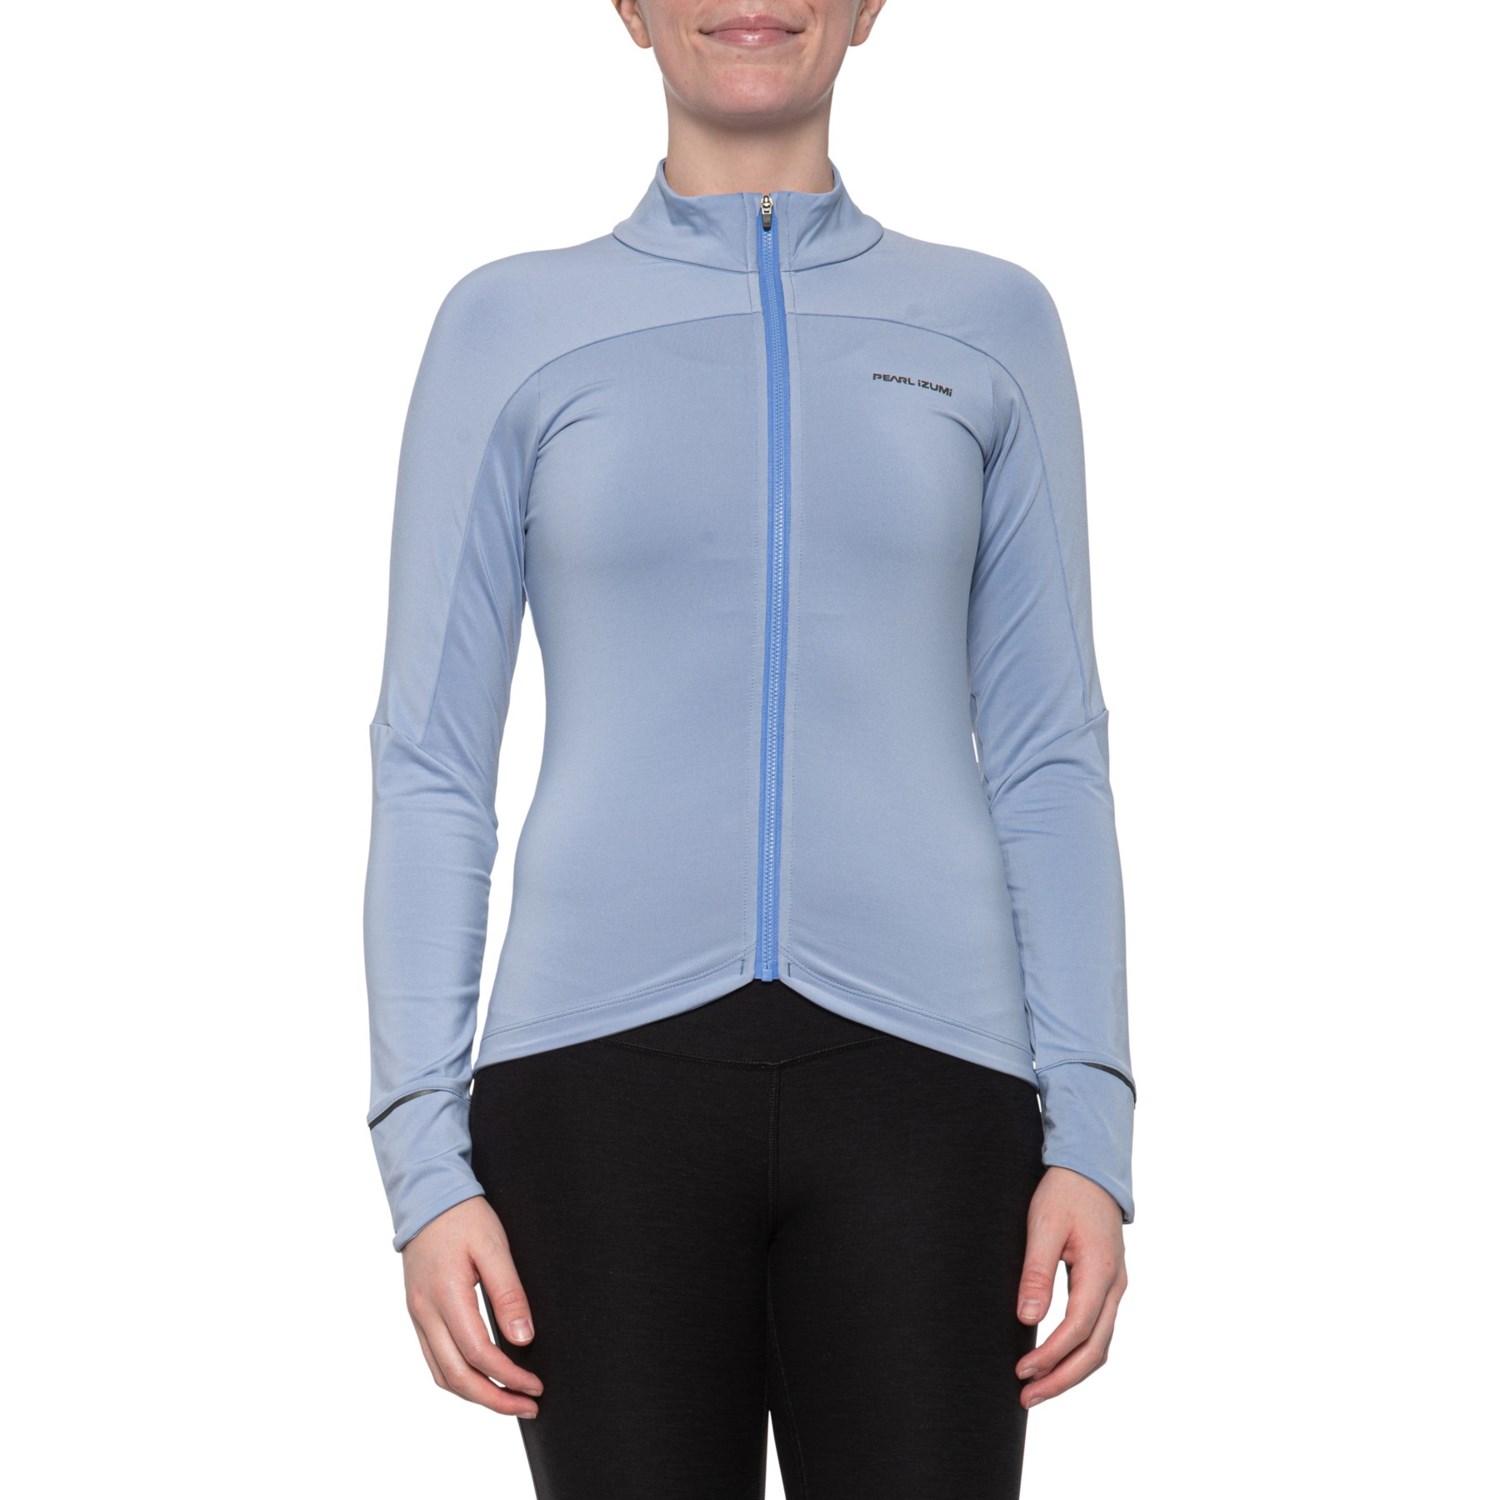 women's thermal cycling jersey